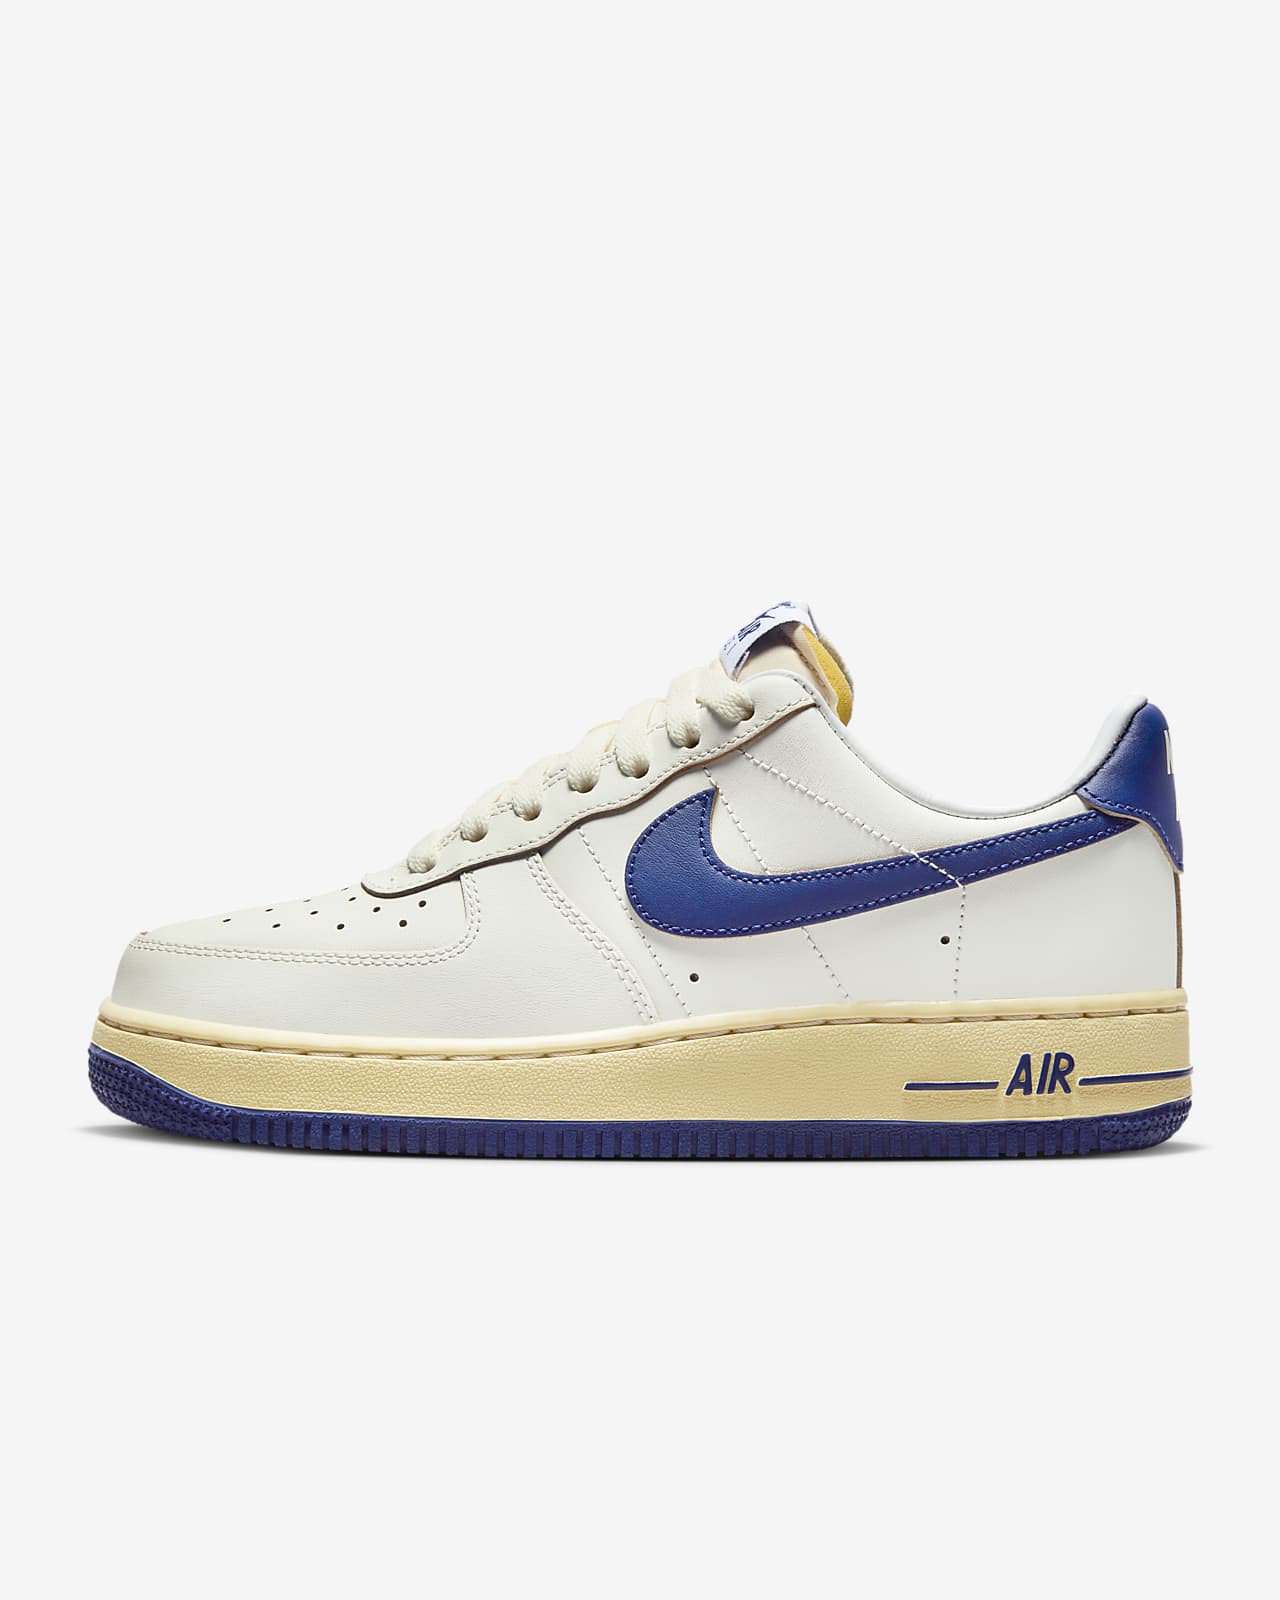 Chaussure Nike Air Force 1 '07 pour femme